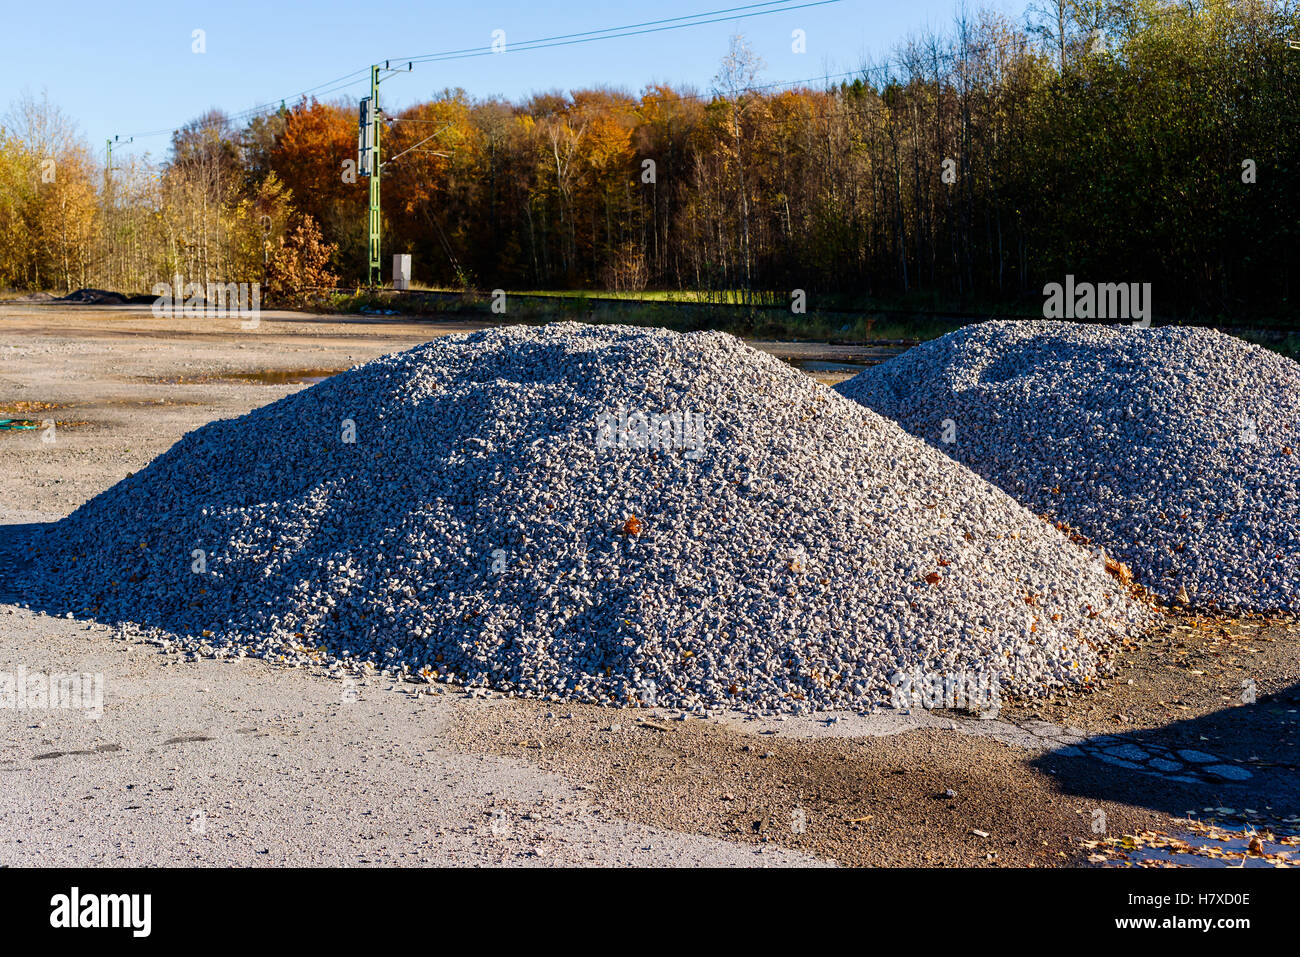 Pile of gravel with railroad tracks in background Stock Photo